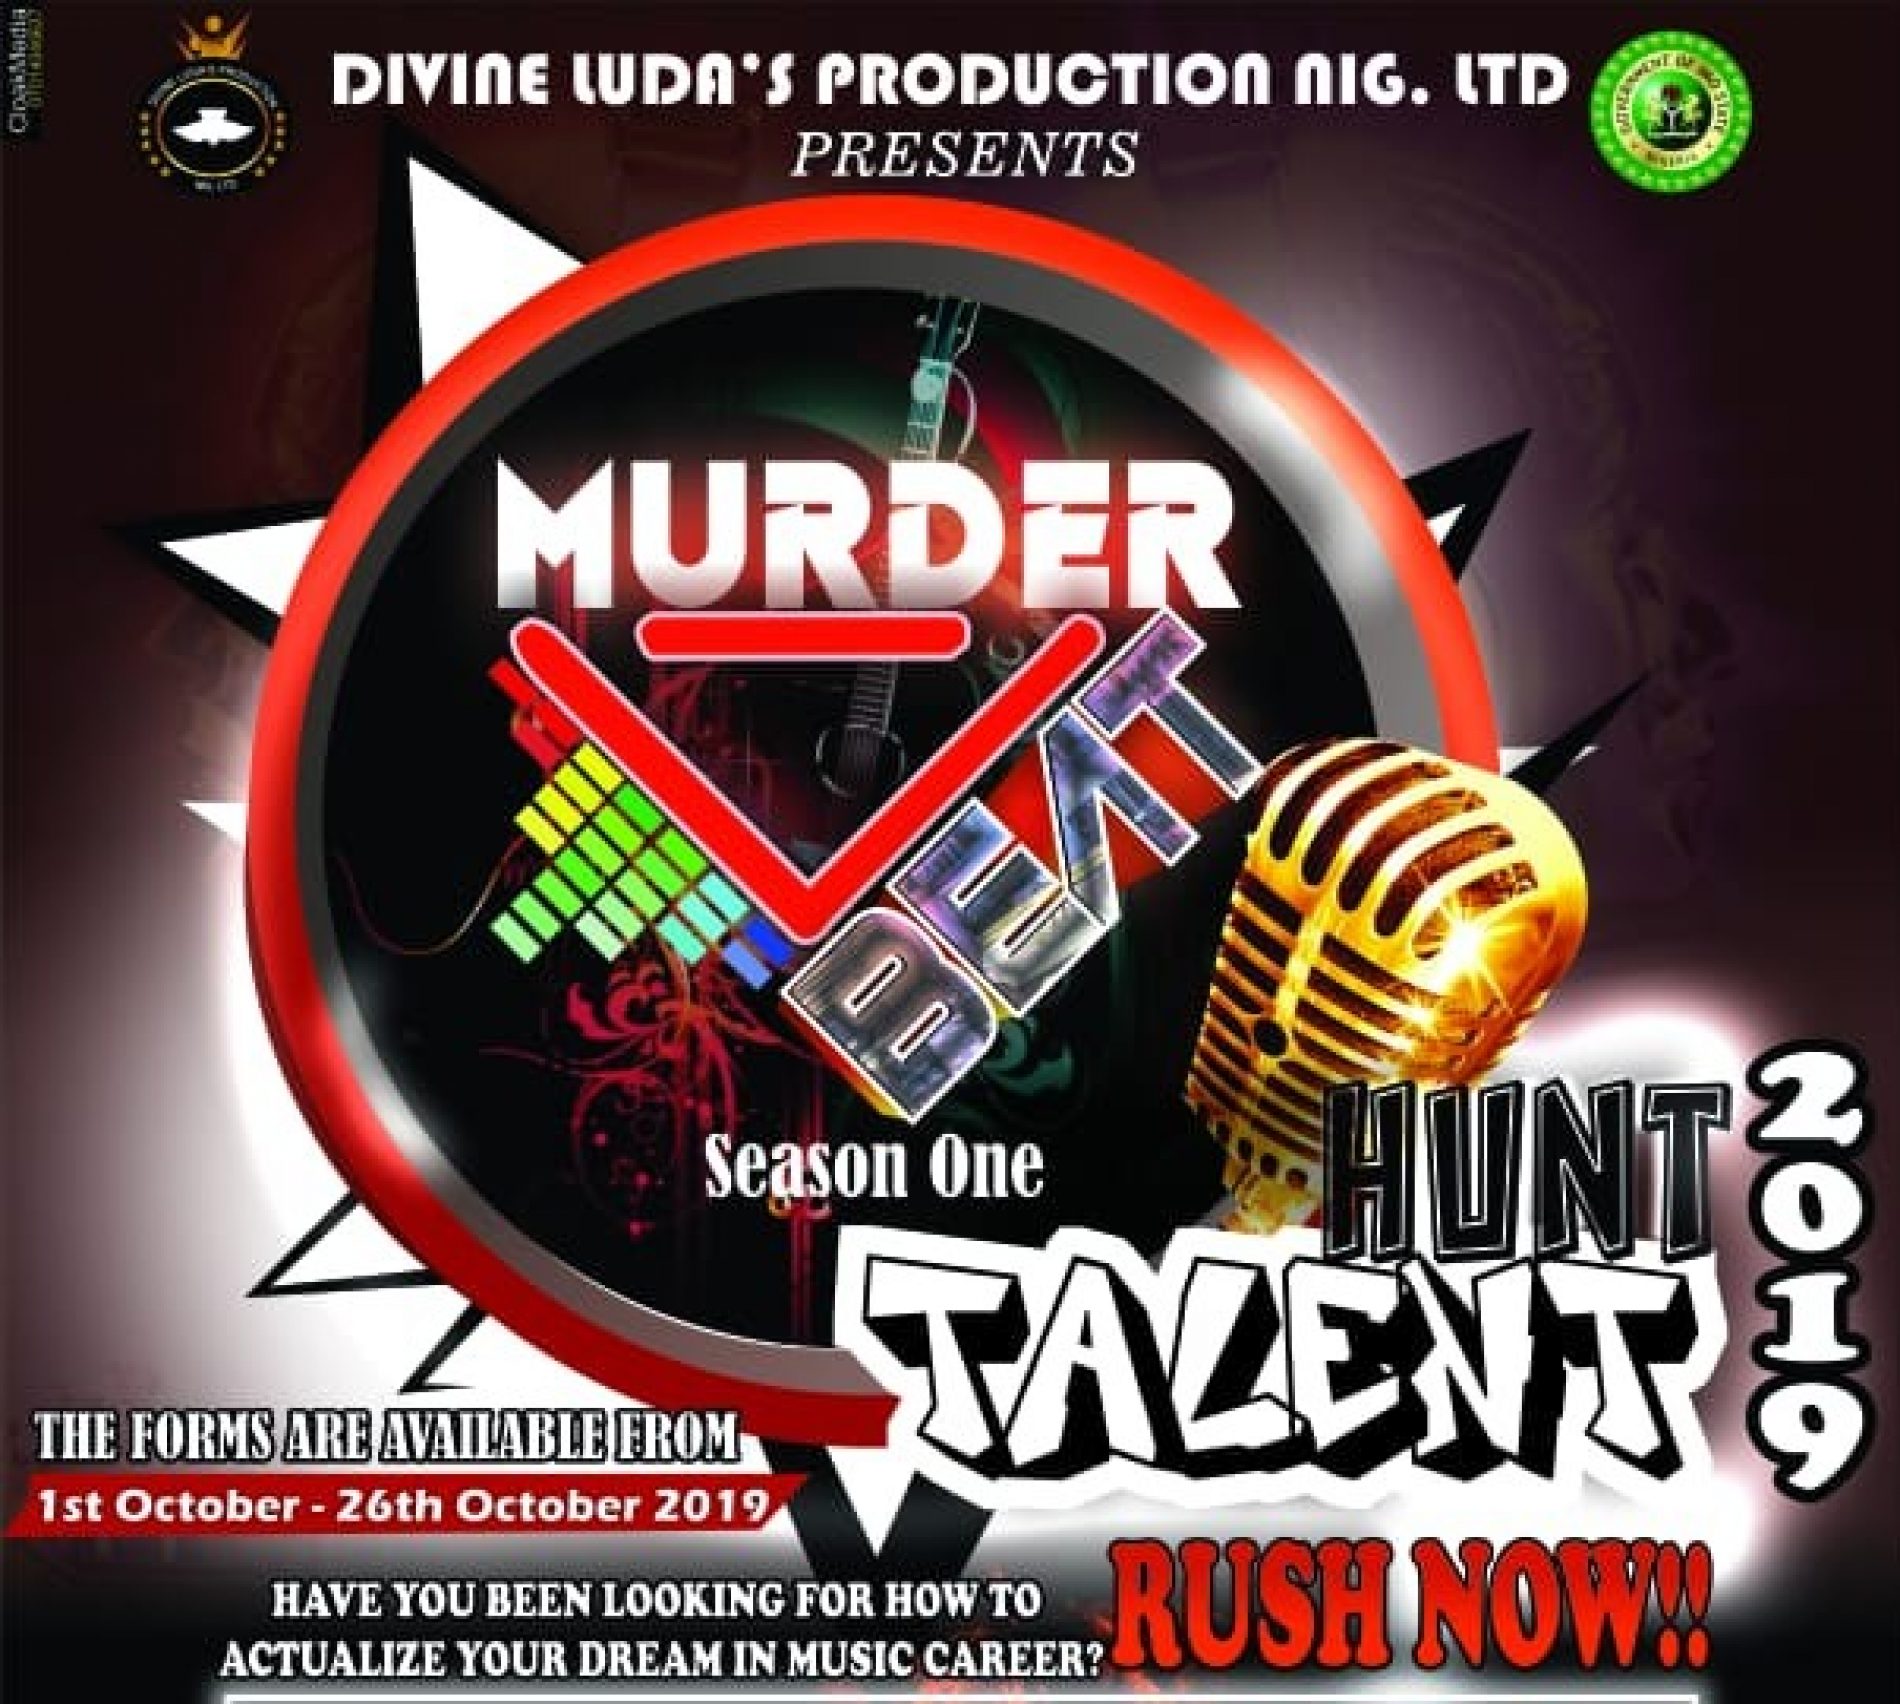 Shine On, Become A Super Star 🌟 with Murder the Beat Talent Hunt ‹Season 1